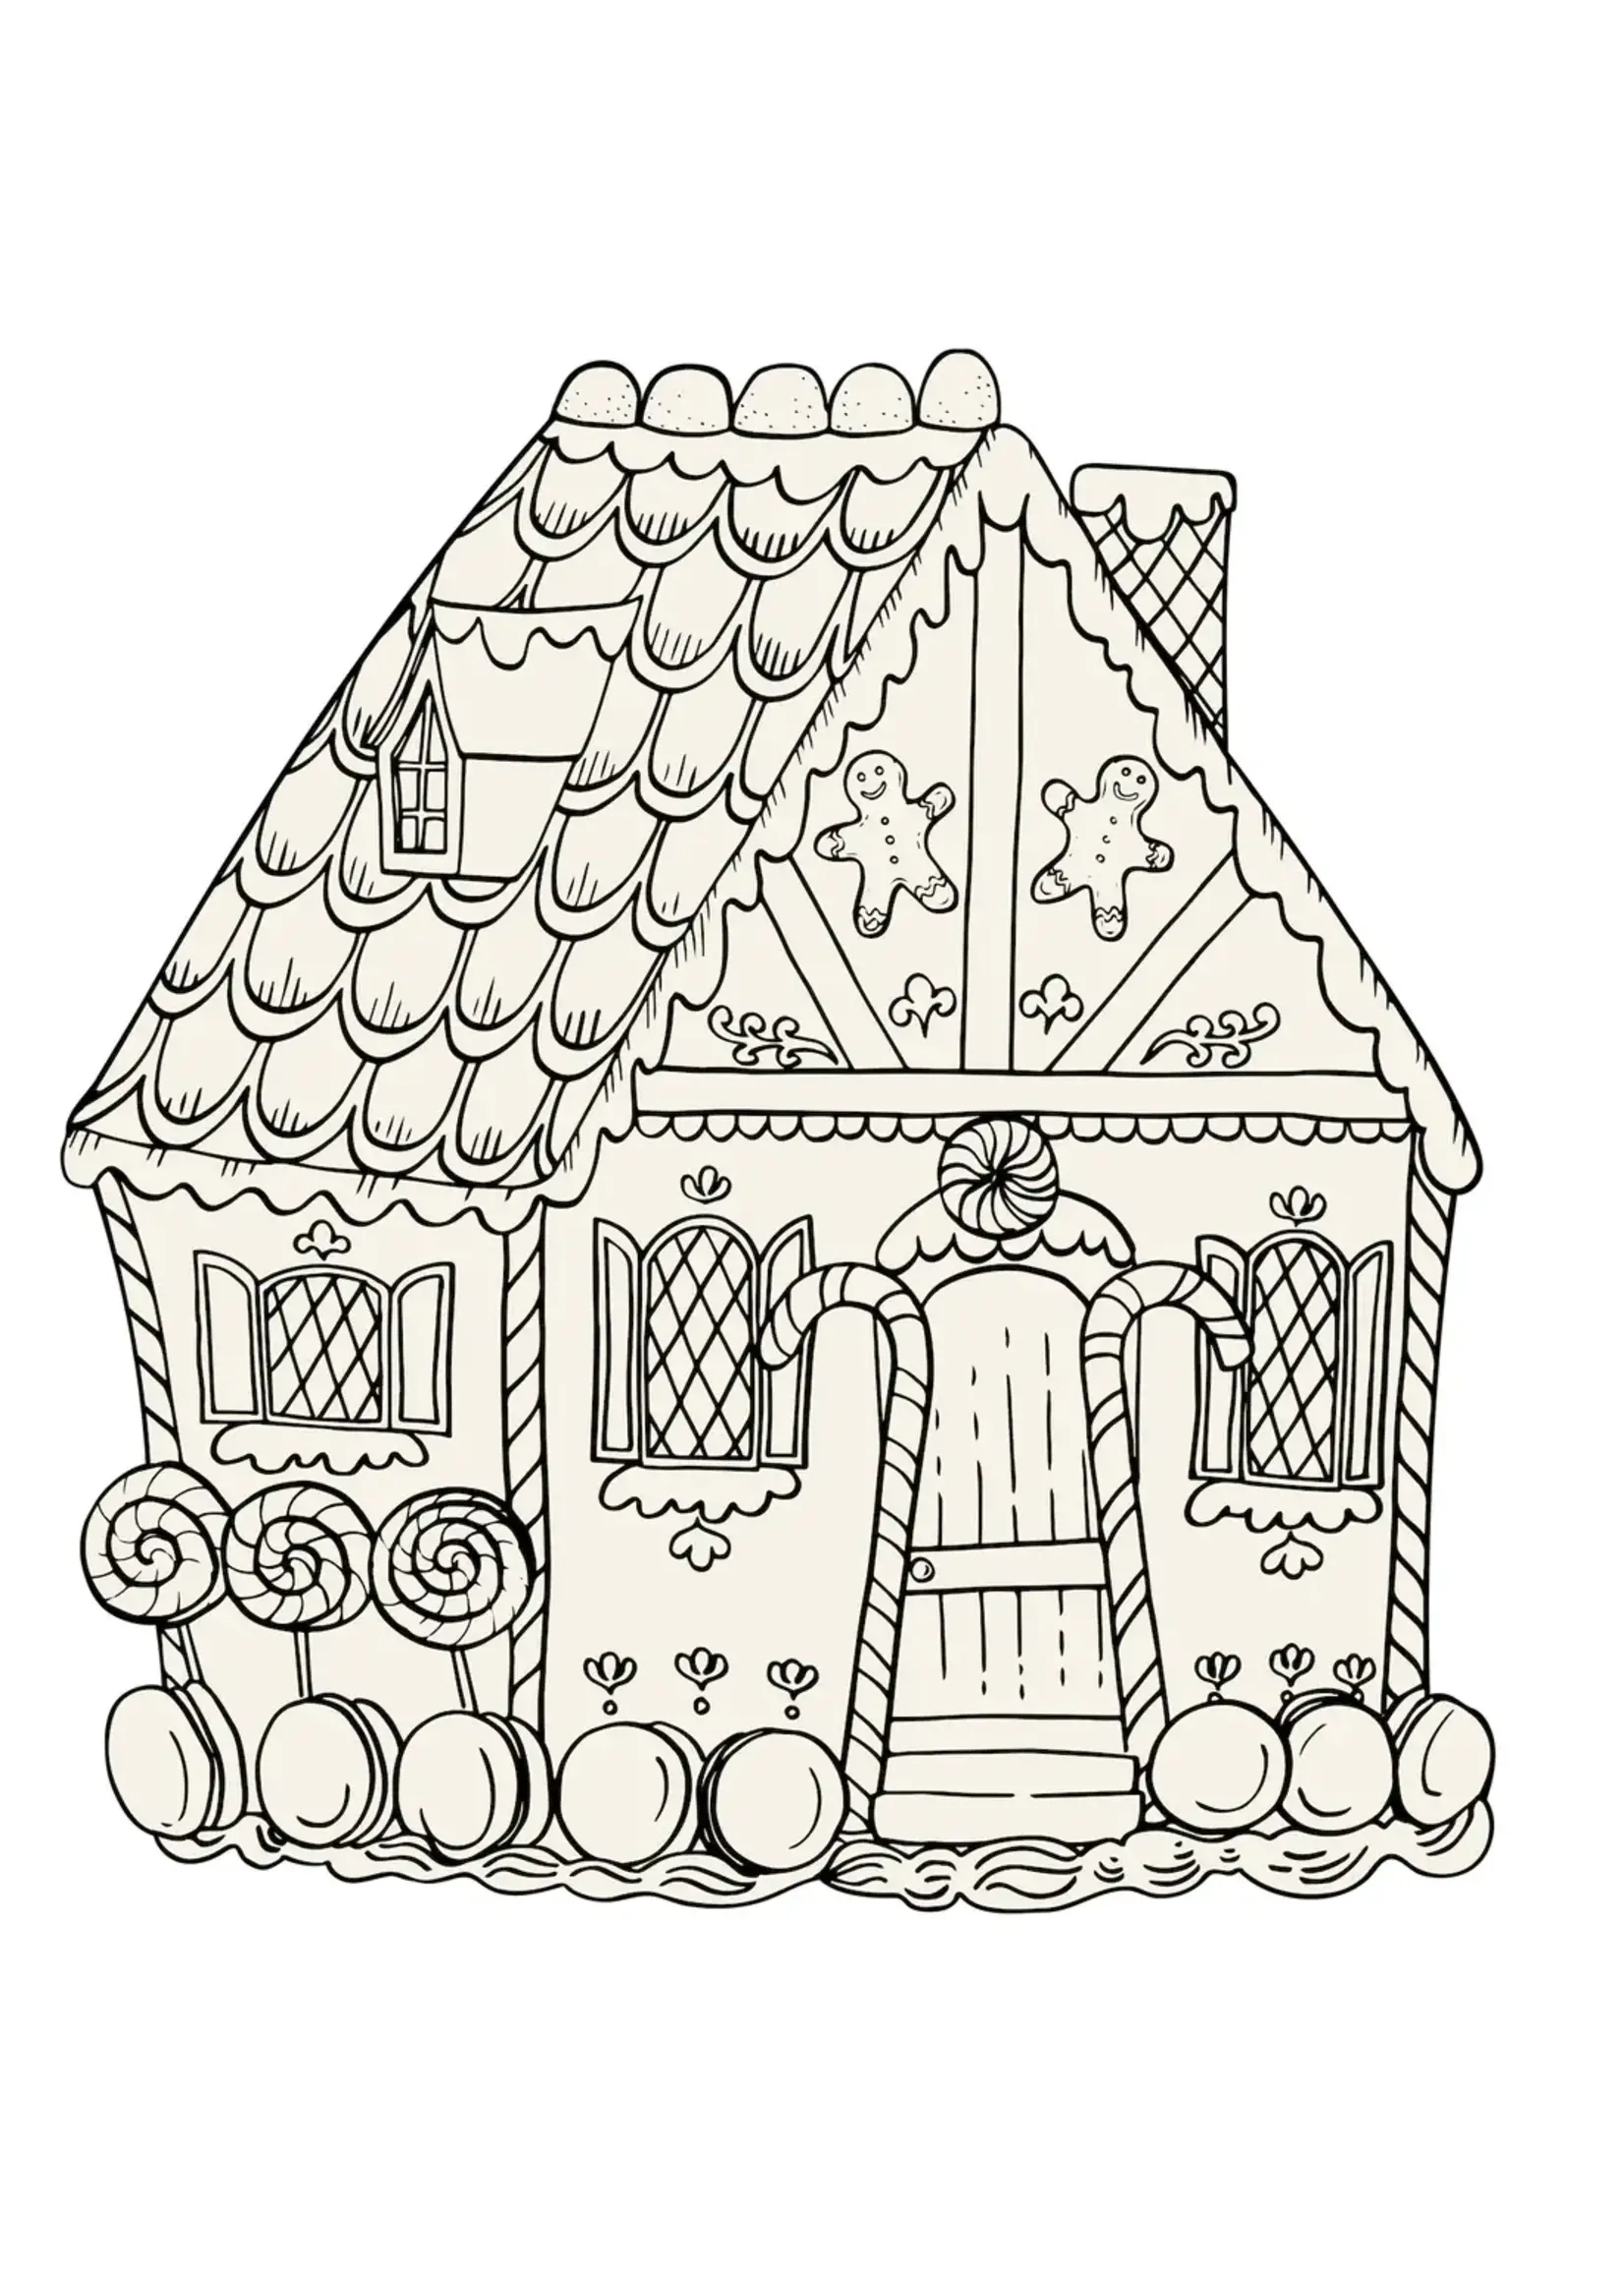 Hester & Cook Die Cut Gingerbread House COLORING Placemat - 12 Sheets